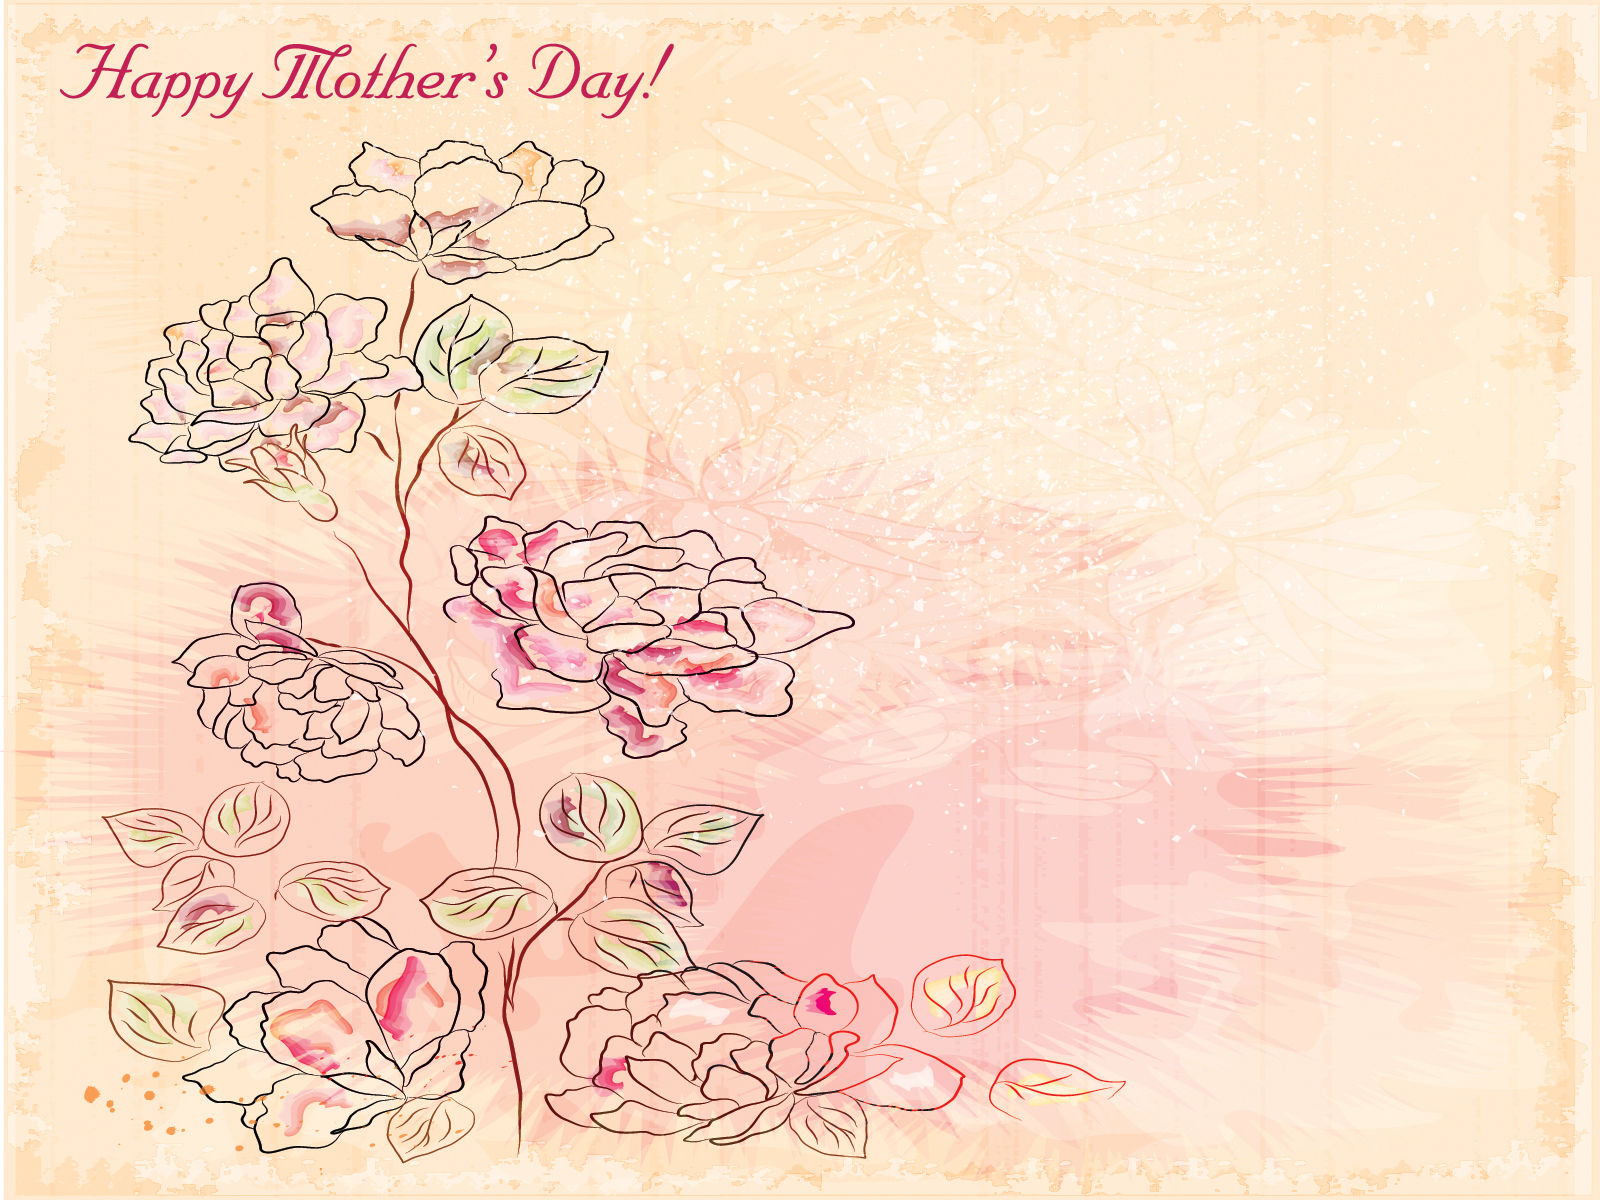 Happy Mothers Day 2013 Powerpoint Templates - Brown, Fuchsia